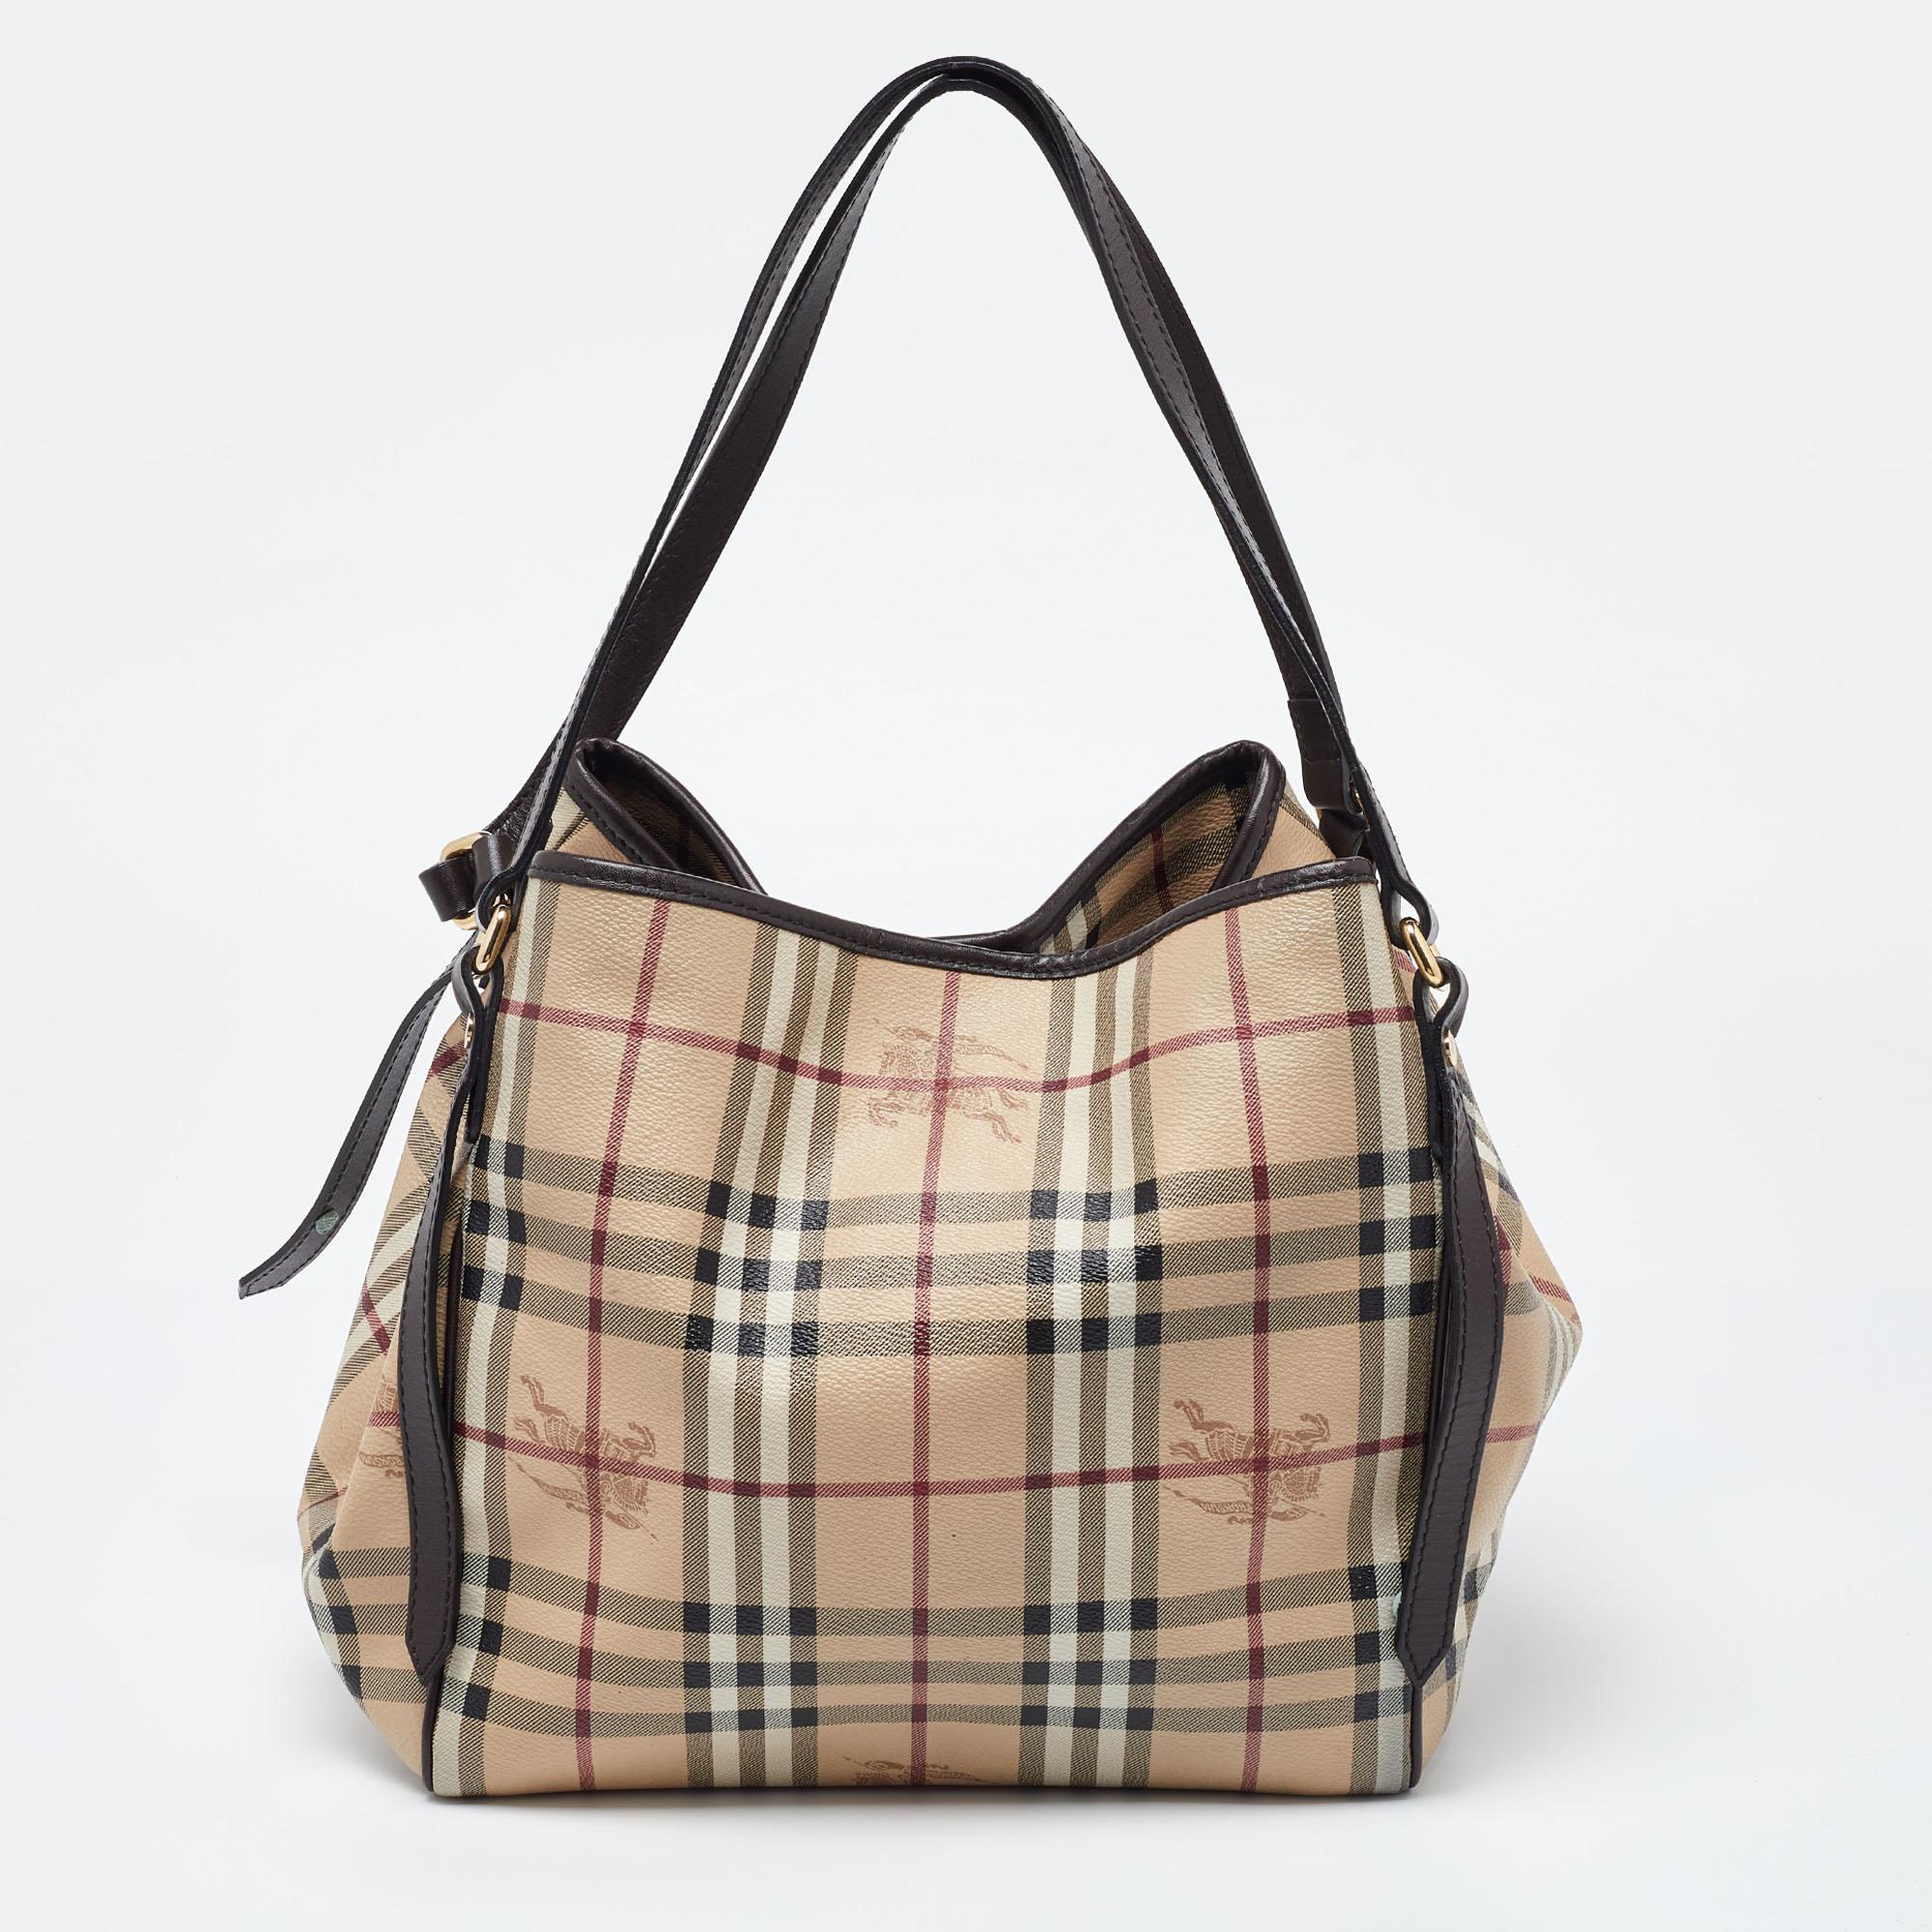 The Canterbury tote from Burberry will suffice your handbag needs with complete elegance. This tote is designed using beige-brown Haymarket Check coated canvas, leather, and gold-tone hardware. It is supported by dual handles and comes with a